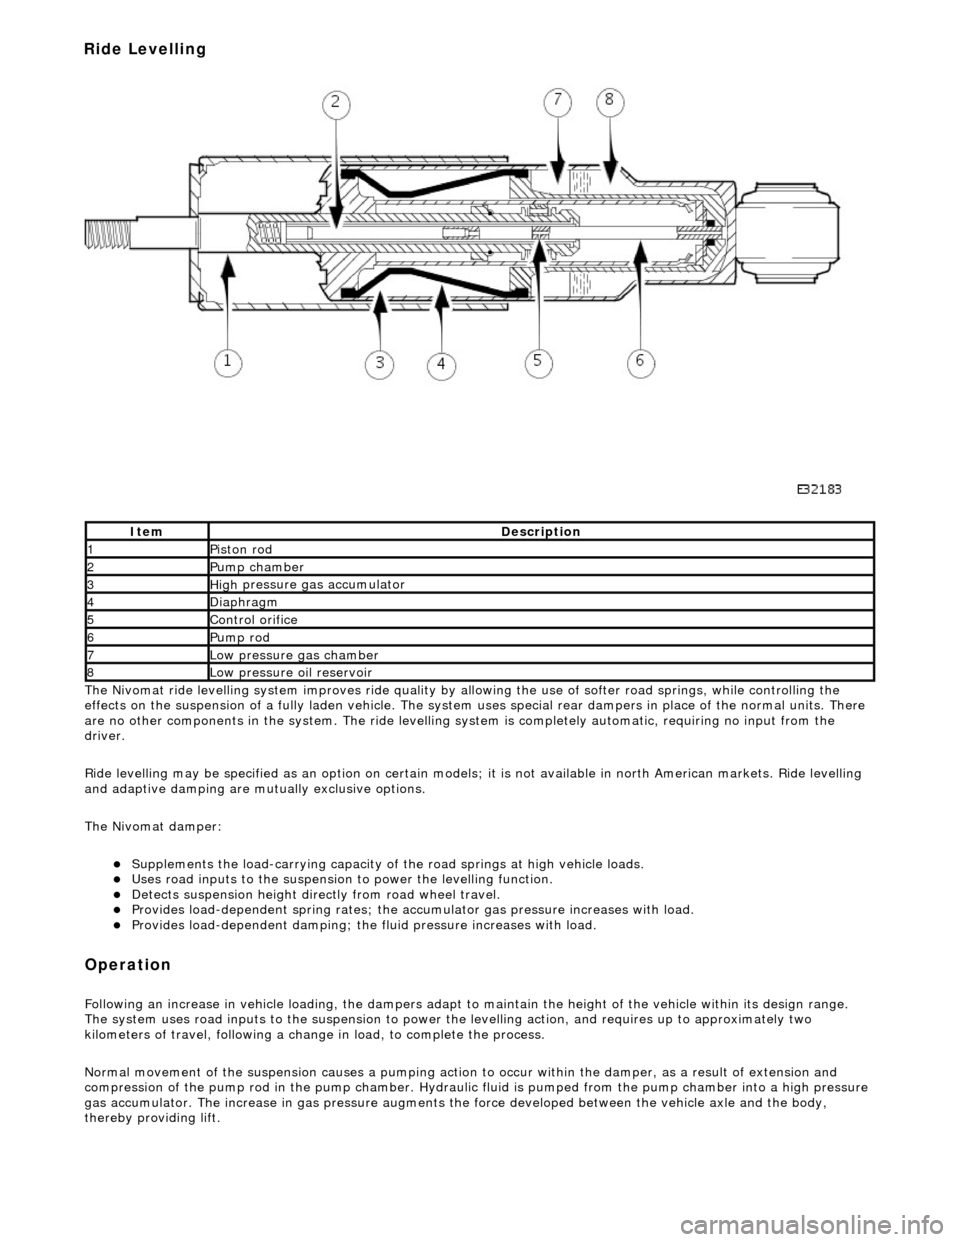 JAGUAR X308 1998 2.G Workshop Manual  
The
  Nivomat ride levelling system improves ride quality by al
lowing the use of softer road springs, while controlling the 
effects on the suspension of a fully laden vehicle. The system uses spec